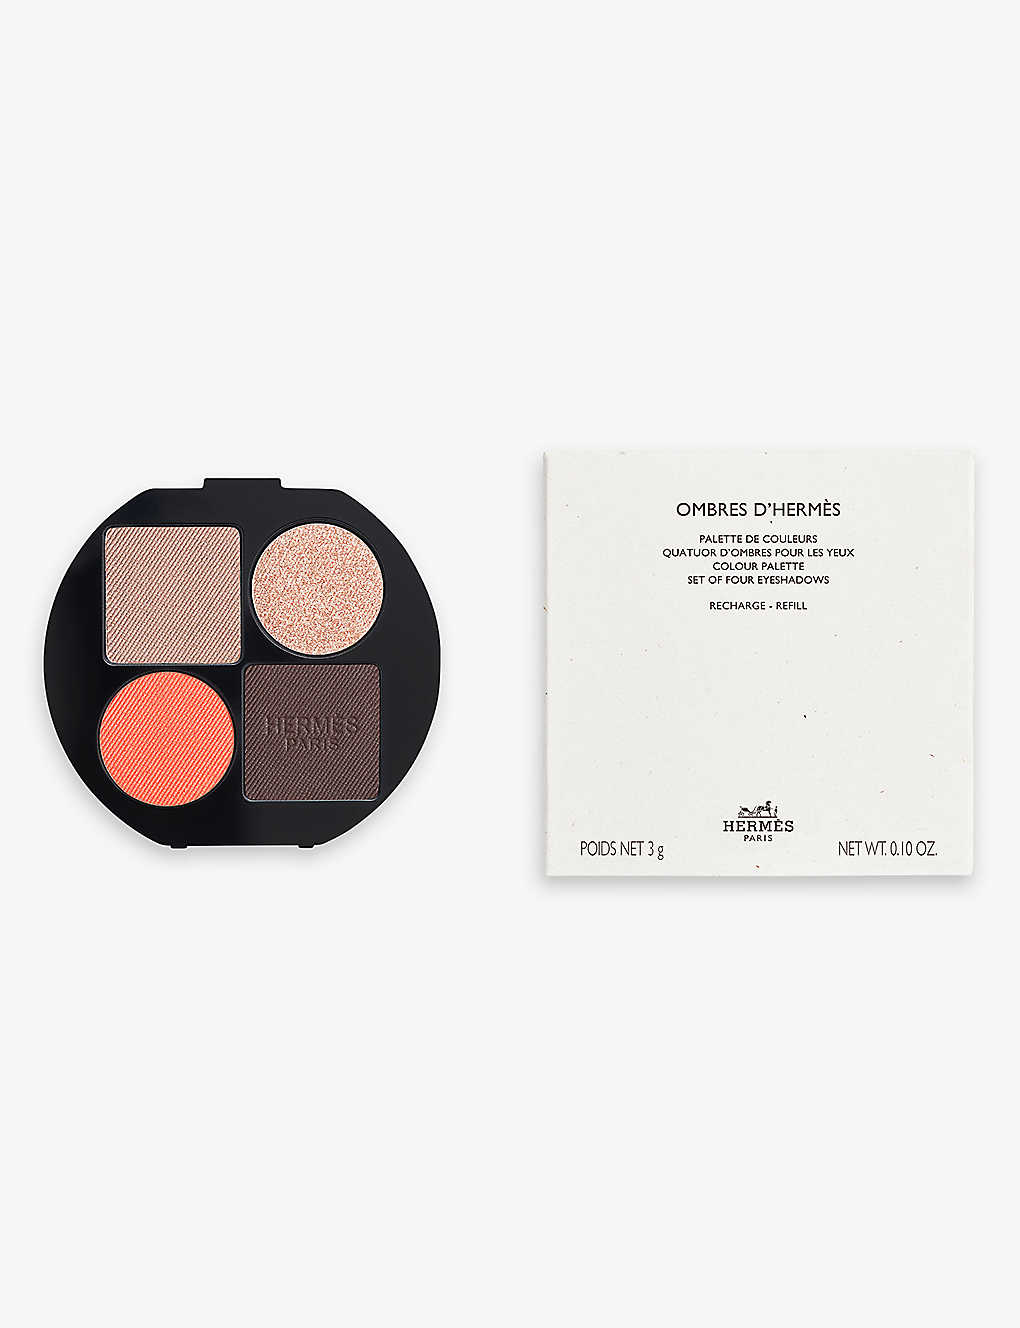 Hermes 03 Ombres Fauves Ombres D'hermès Eyeshadow Palette Refill 3g